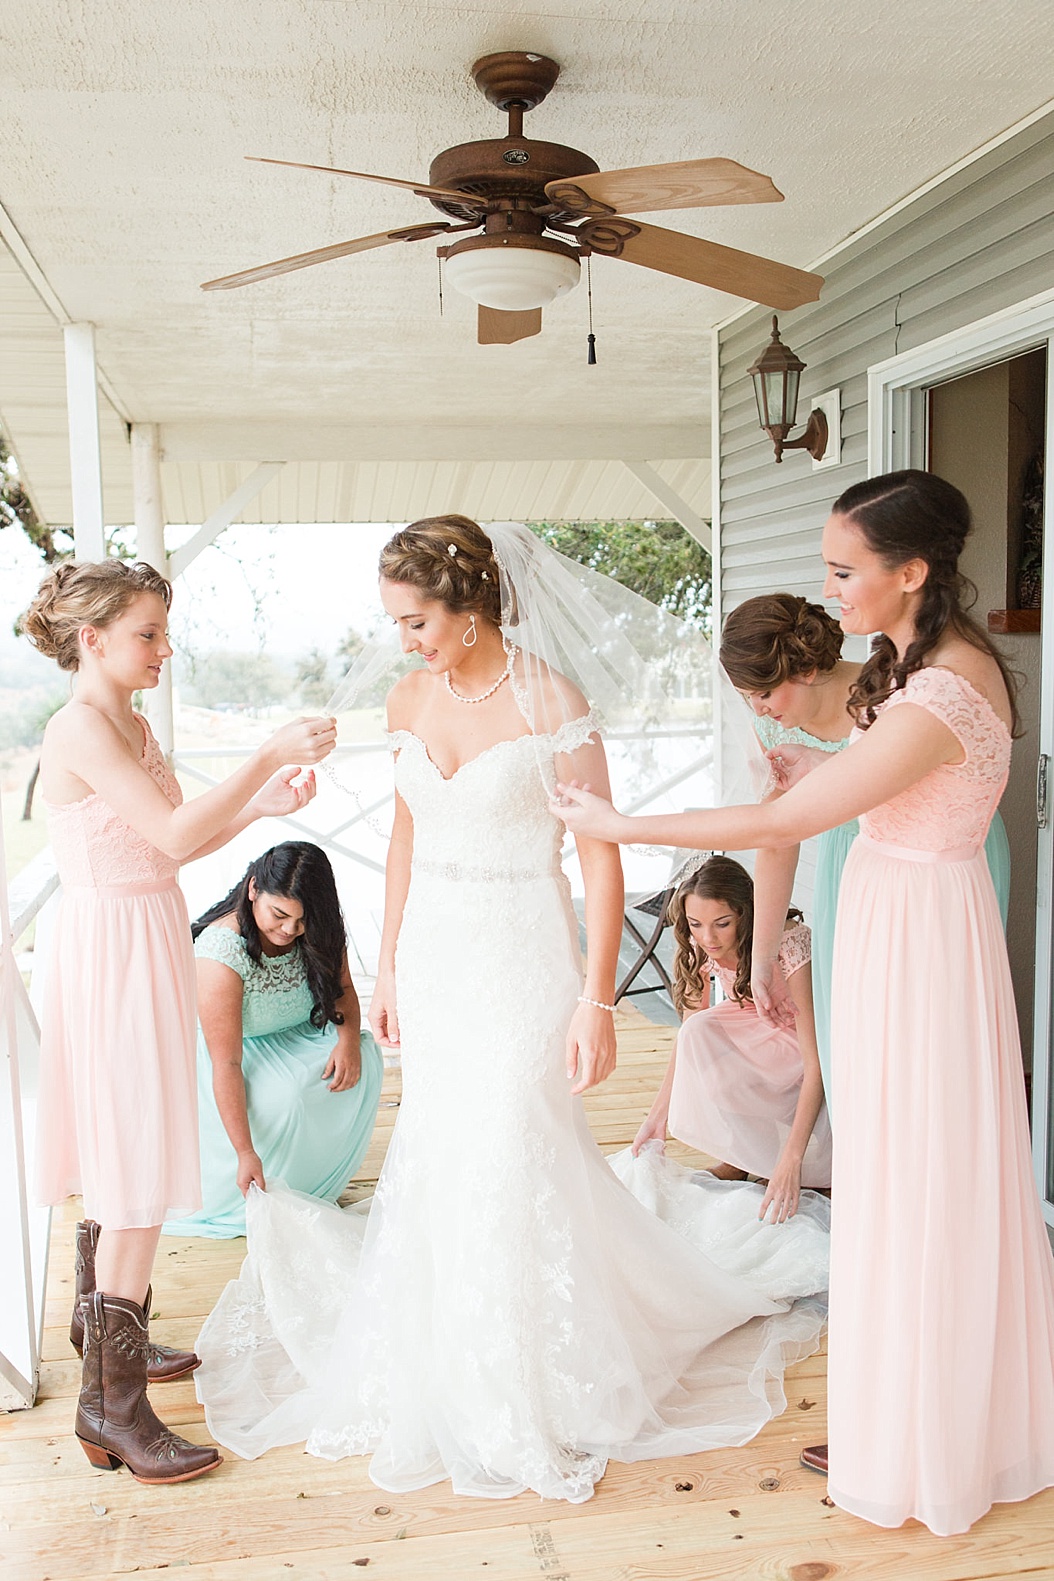 A Peach and Mint Country Chic Wedding at Happy H Ranch by Allison Jeffers Wedding Photography. Comfort Wedding Photographer 0015